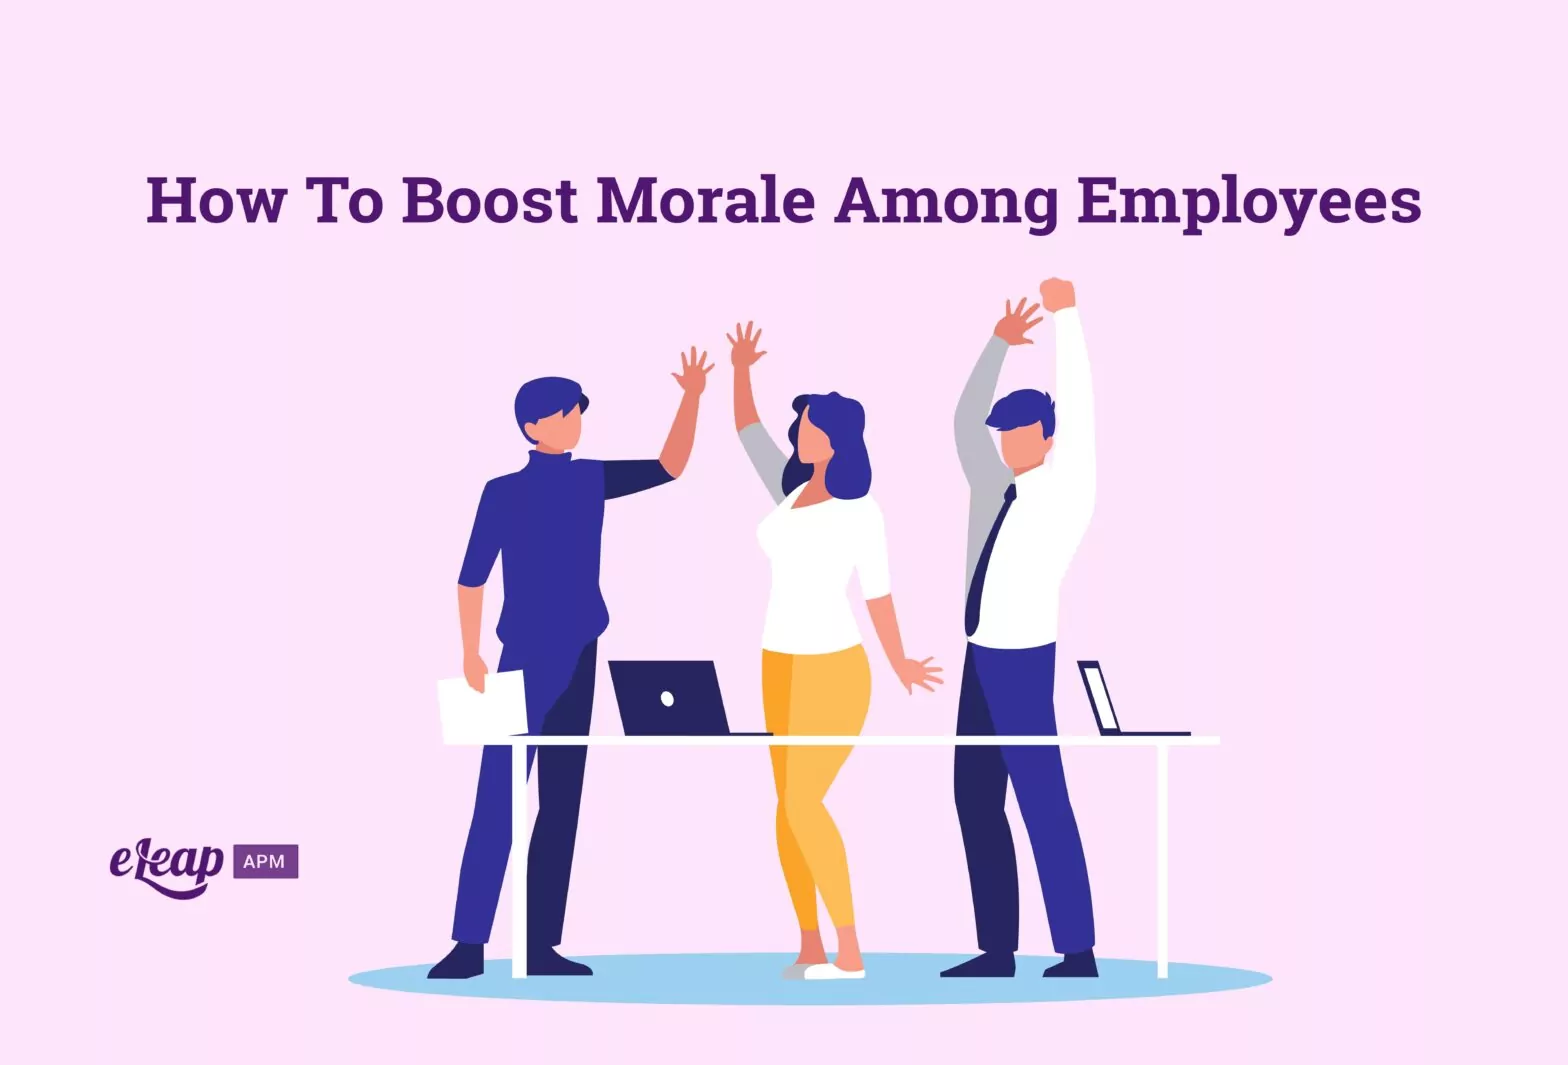 How to Boost Morale Among Employees